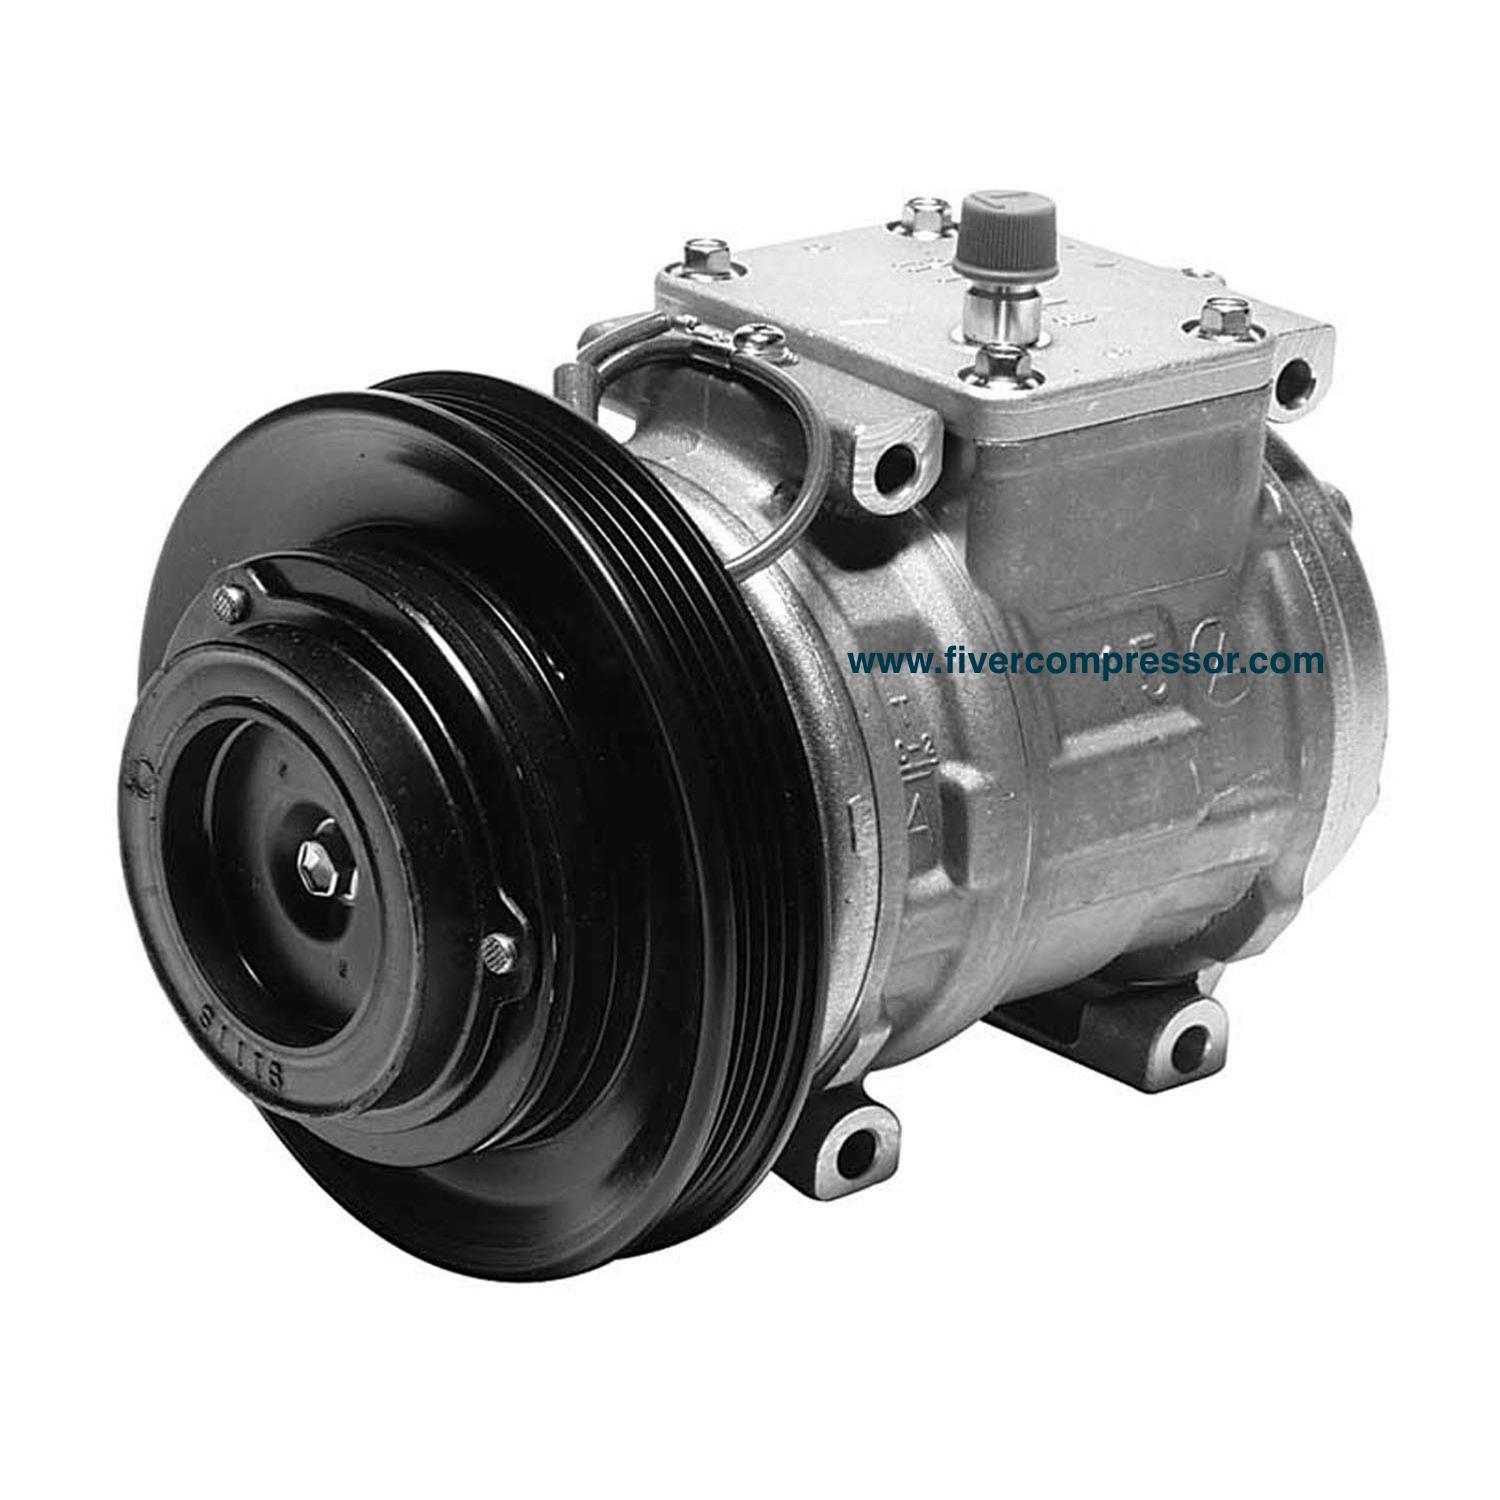 10S15C 6PK Auto A/C Compressor 4711169,8310-1A300, 88320-02040, 88320-1A420, 88320-34010 for Toyota <a href=http://www.fivercompressor.com/toyota-AC-compressor.html target='_blank'>Corolla</a> DX/LE 1993-1997